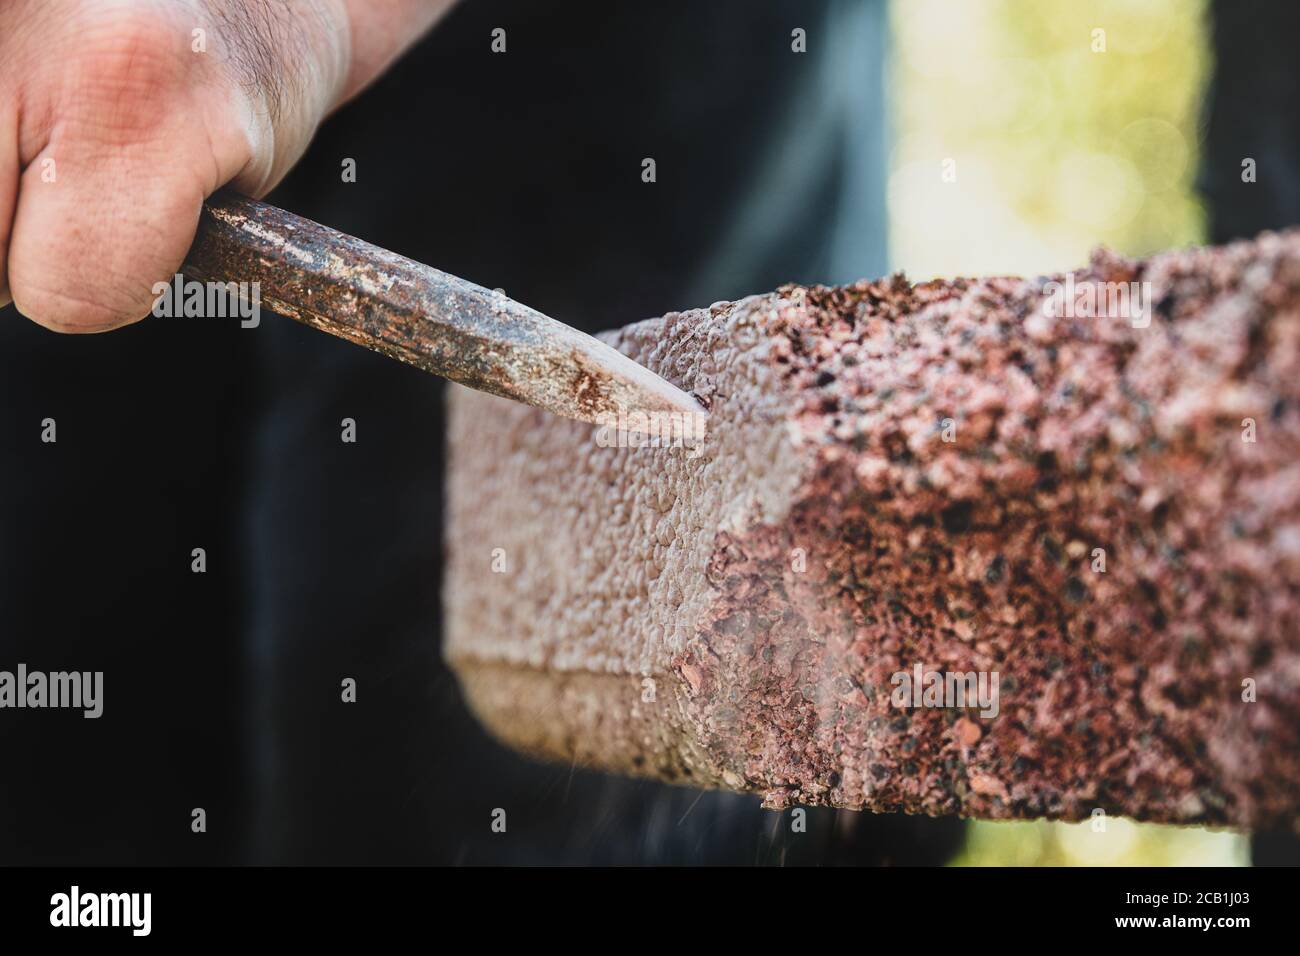 Close-up of a man cutting stone with a chisel, craftsman tears down a wall Stock Photo